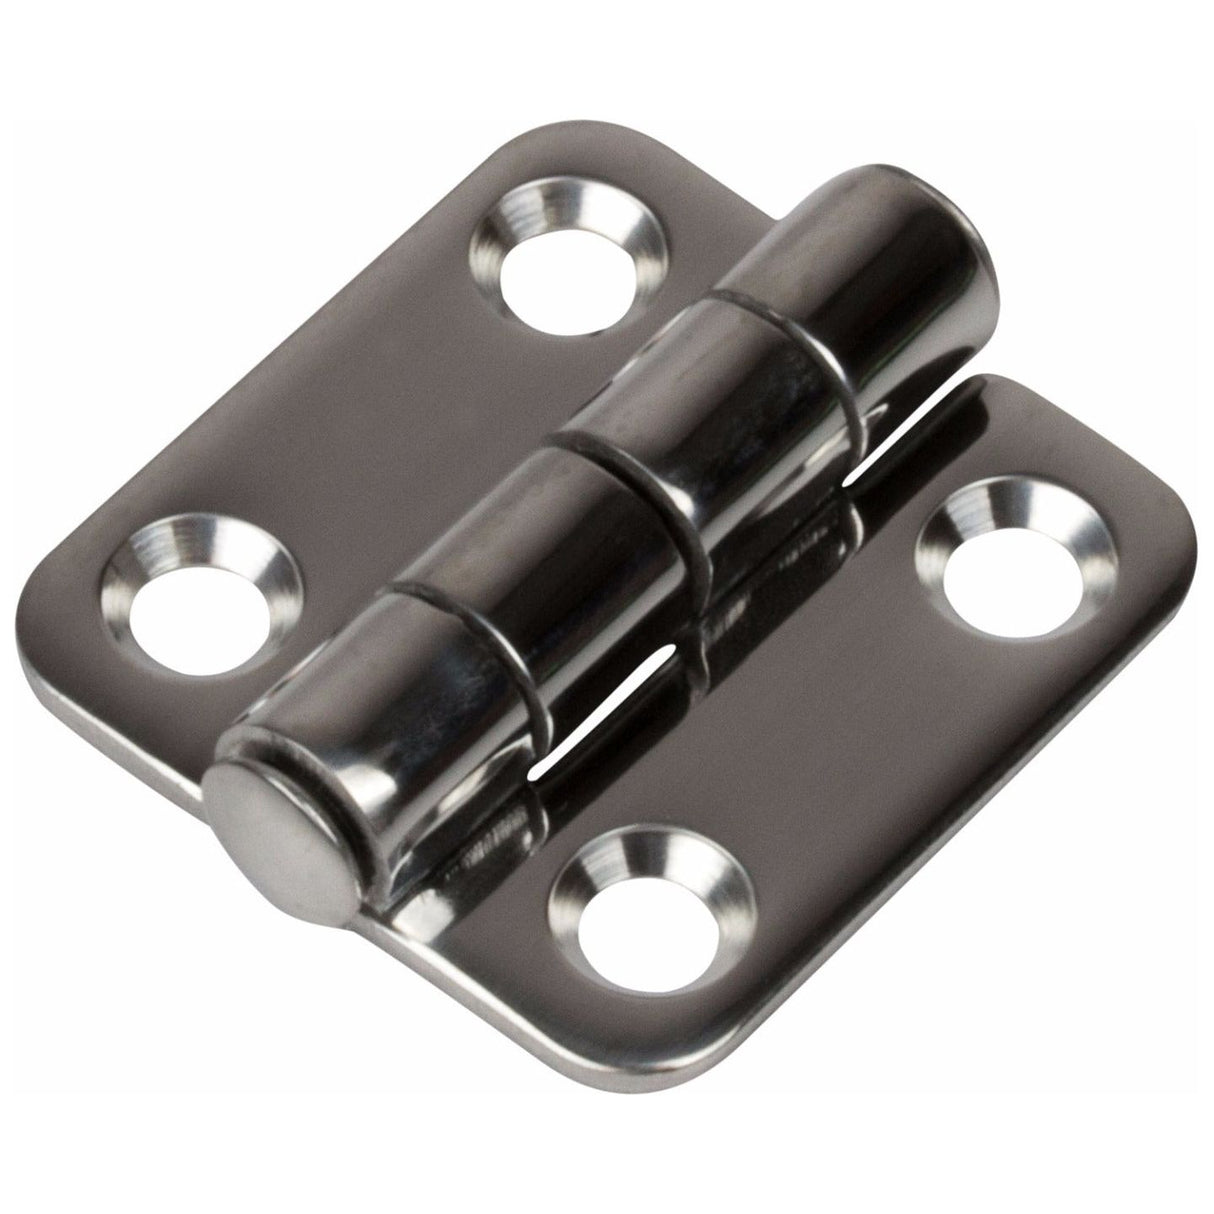 Small Stainless Steel Utility Hinge